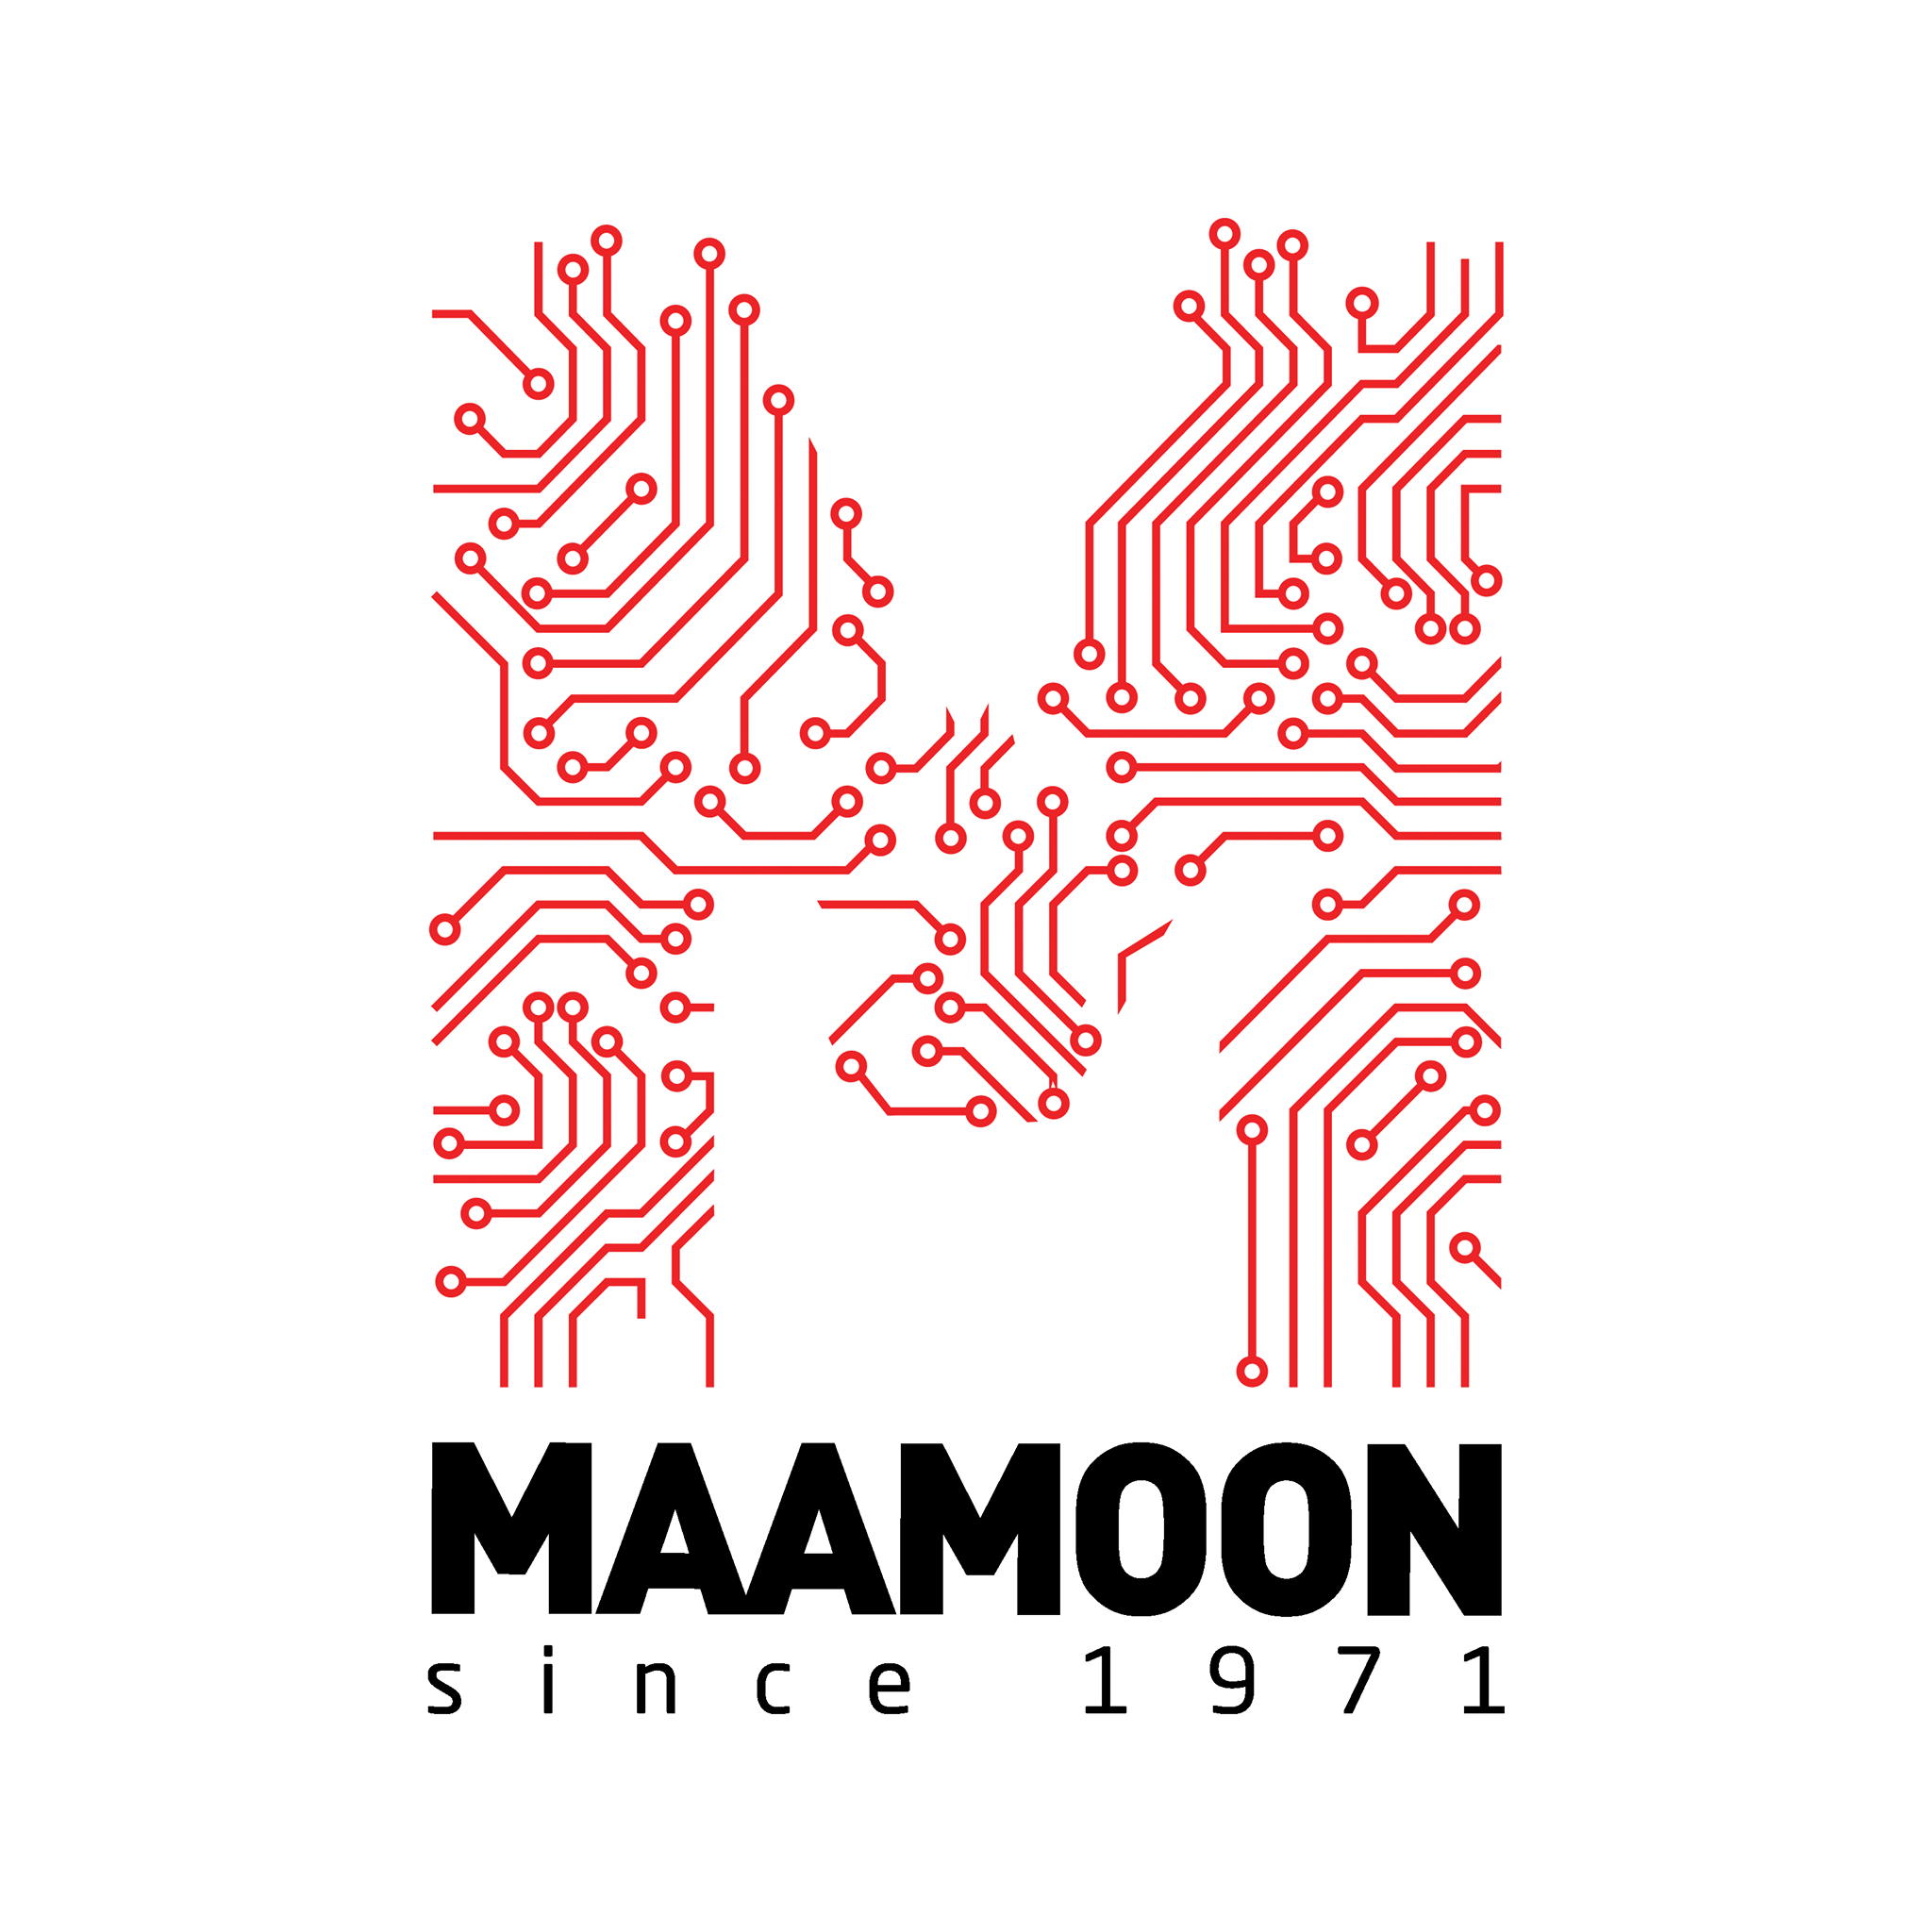 Maamoon Est. For Electrical Engineering - logo